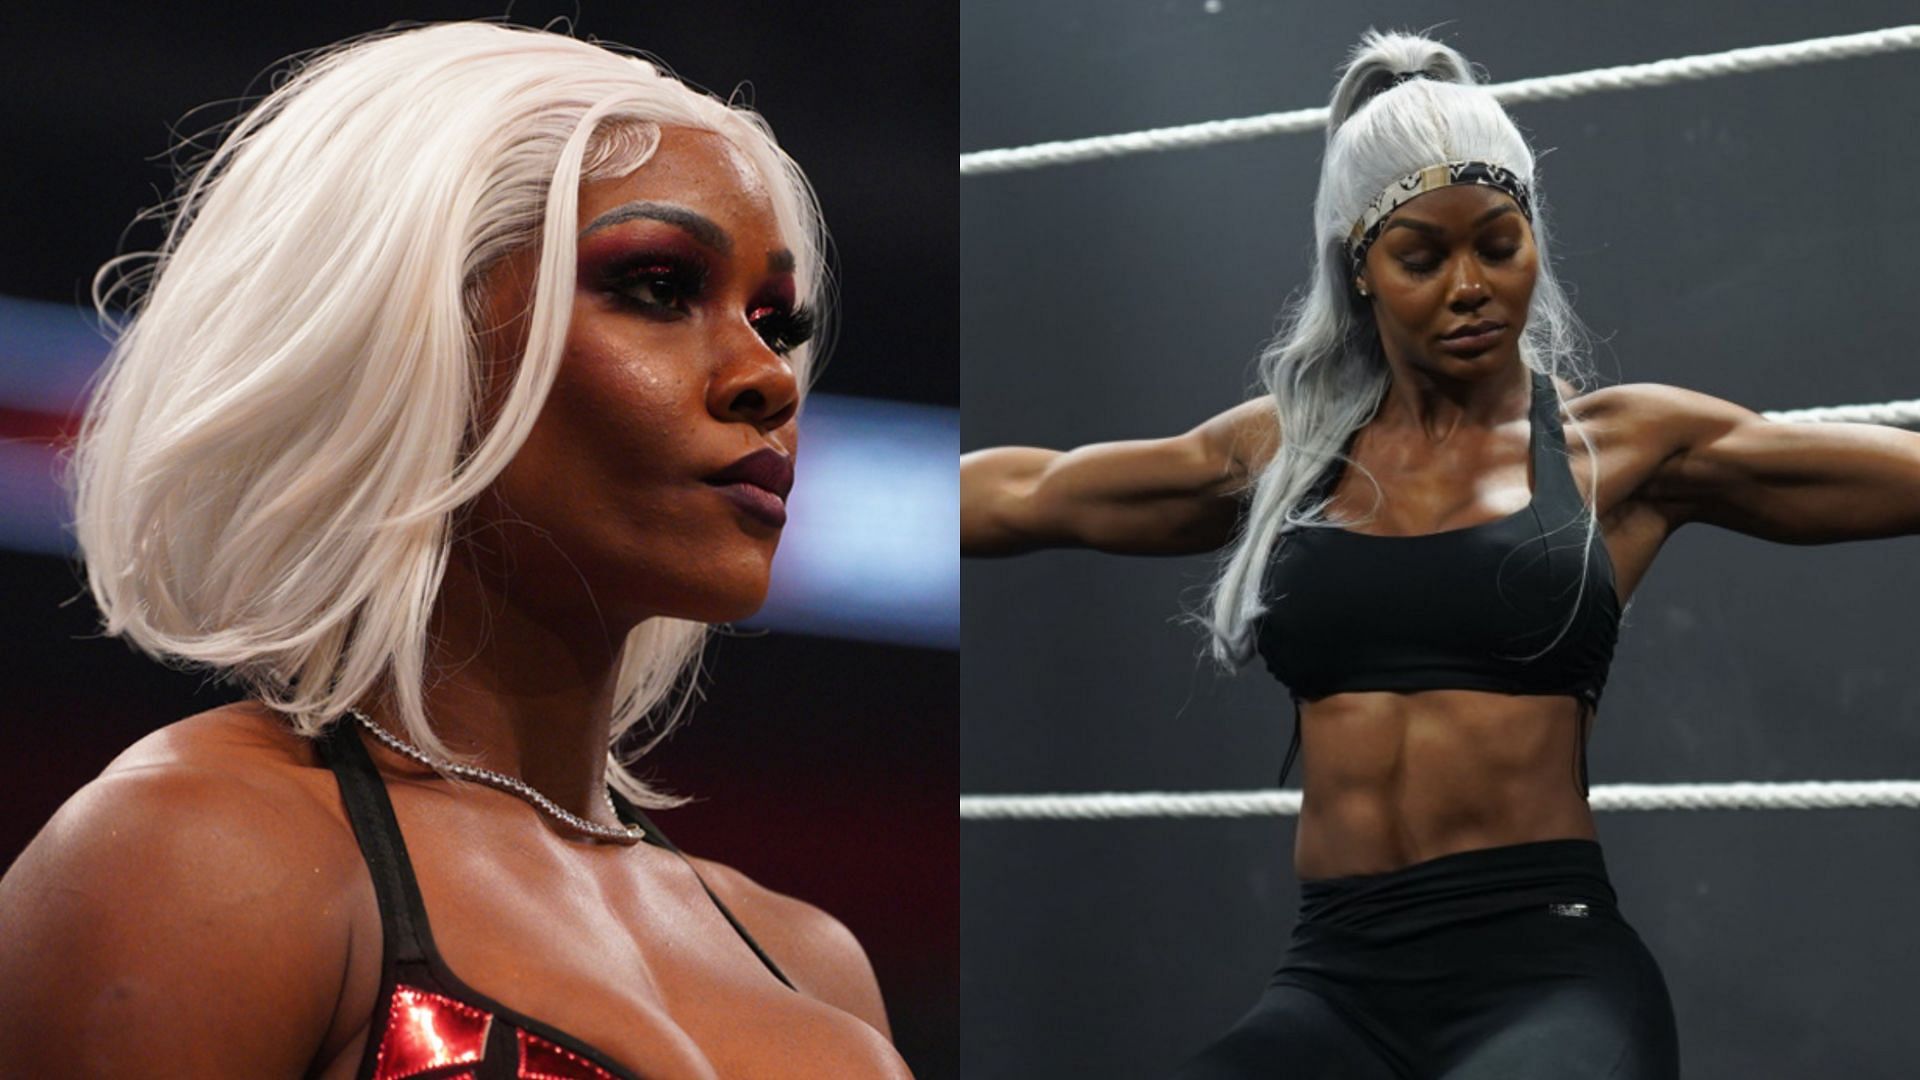 Former AEW TBS Champion Jade Cargill recently joined WWE